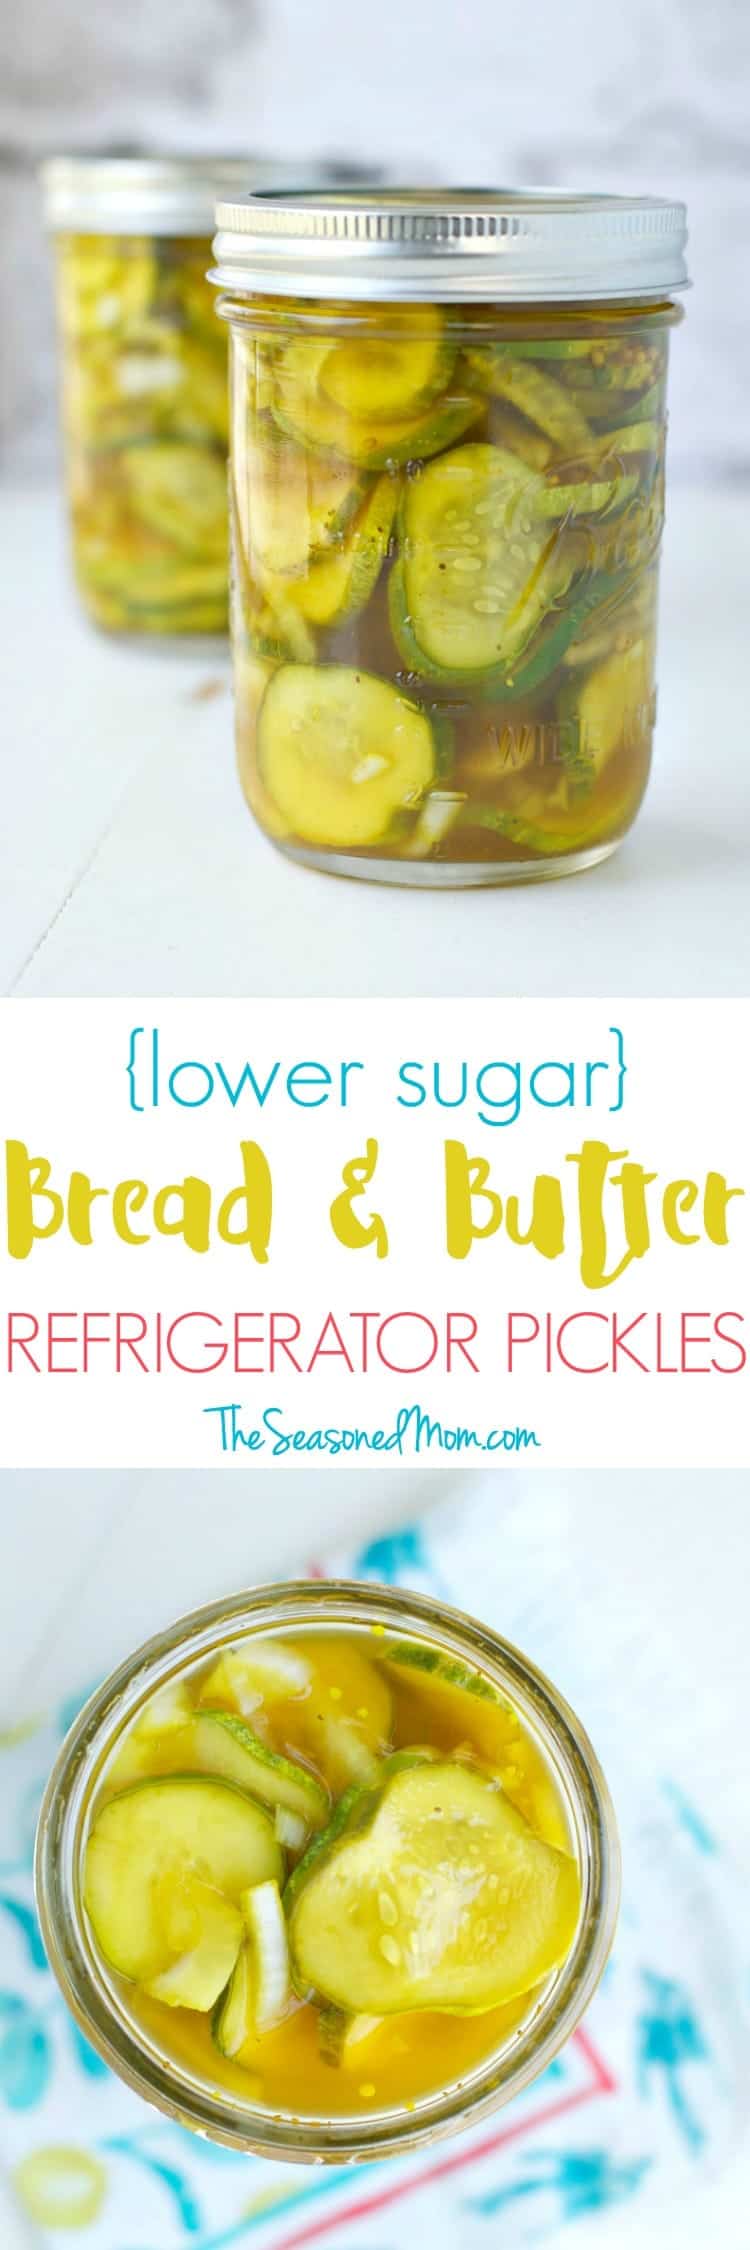 There's no fancy canning necessary! With just a few minutes of hands-on time, you can have fresh, sweet, and tangy Lower Sugar Bread and Butter Refrigerator Pickles ready to enjoy. This clean eating snack is perfect for adding to salads, stuffing inside sandwiches, or enjoying on its own!